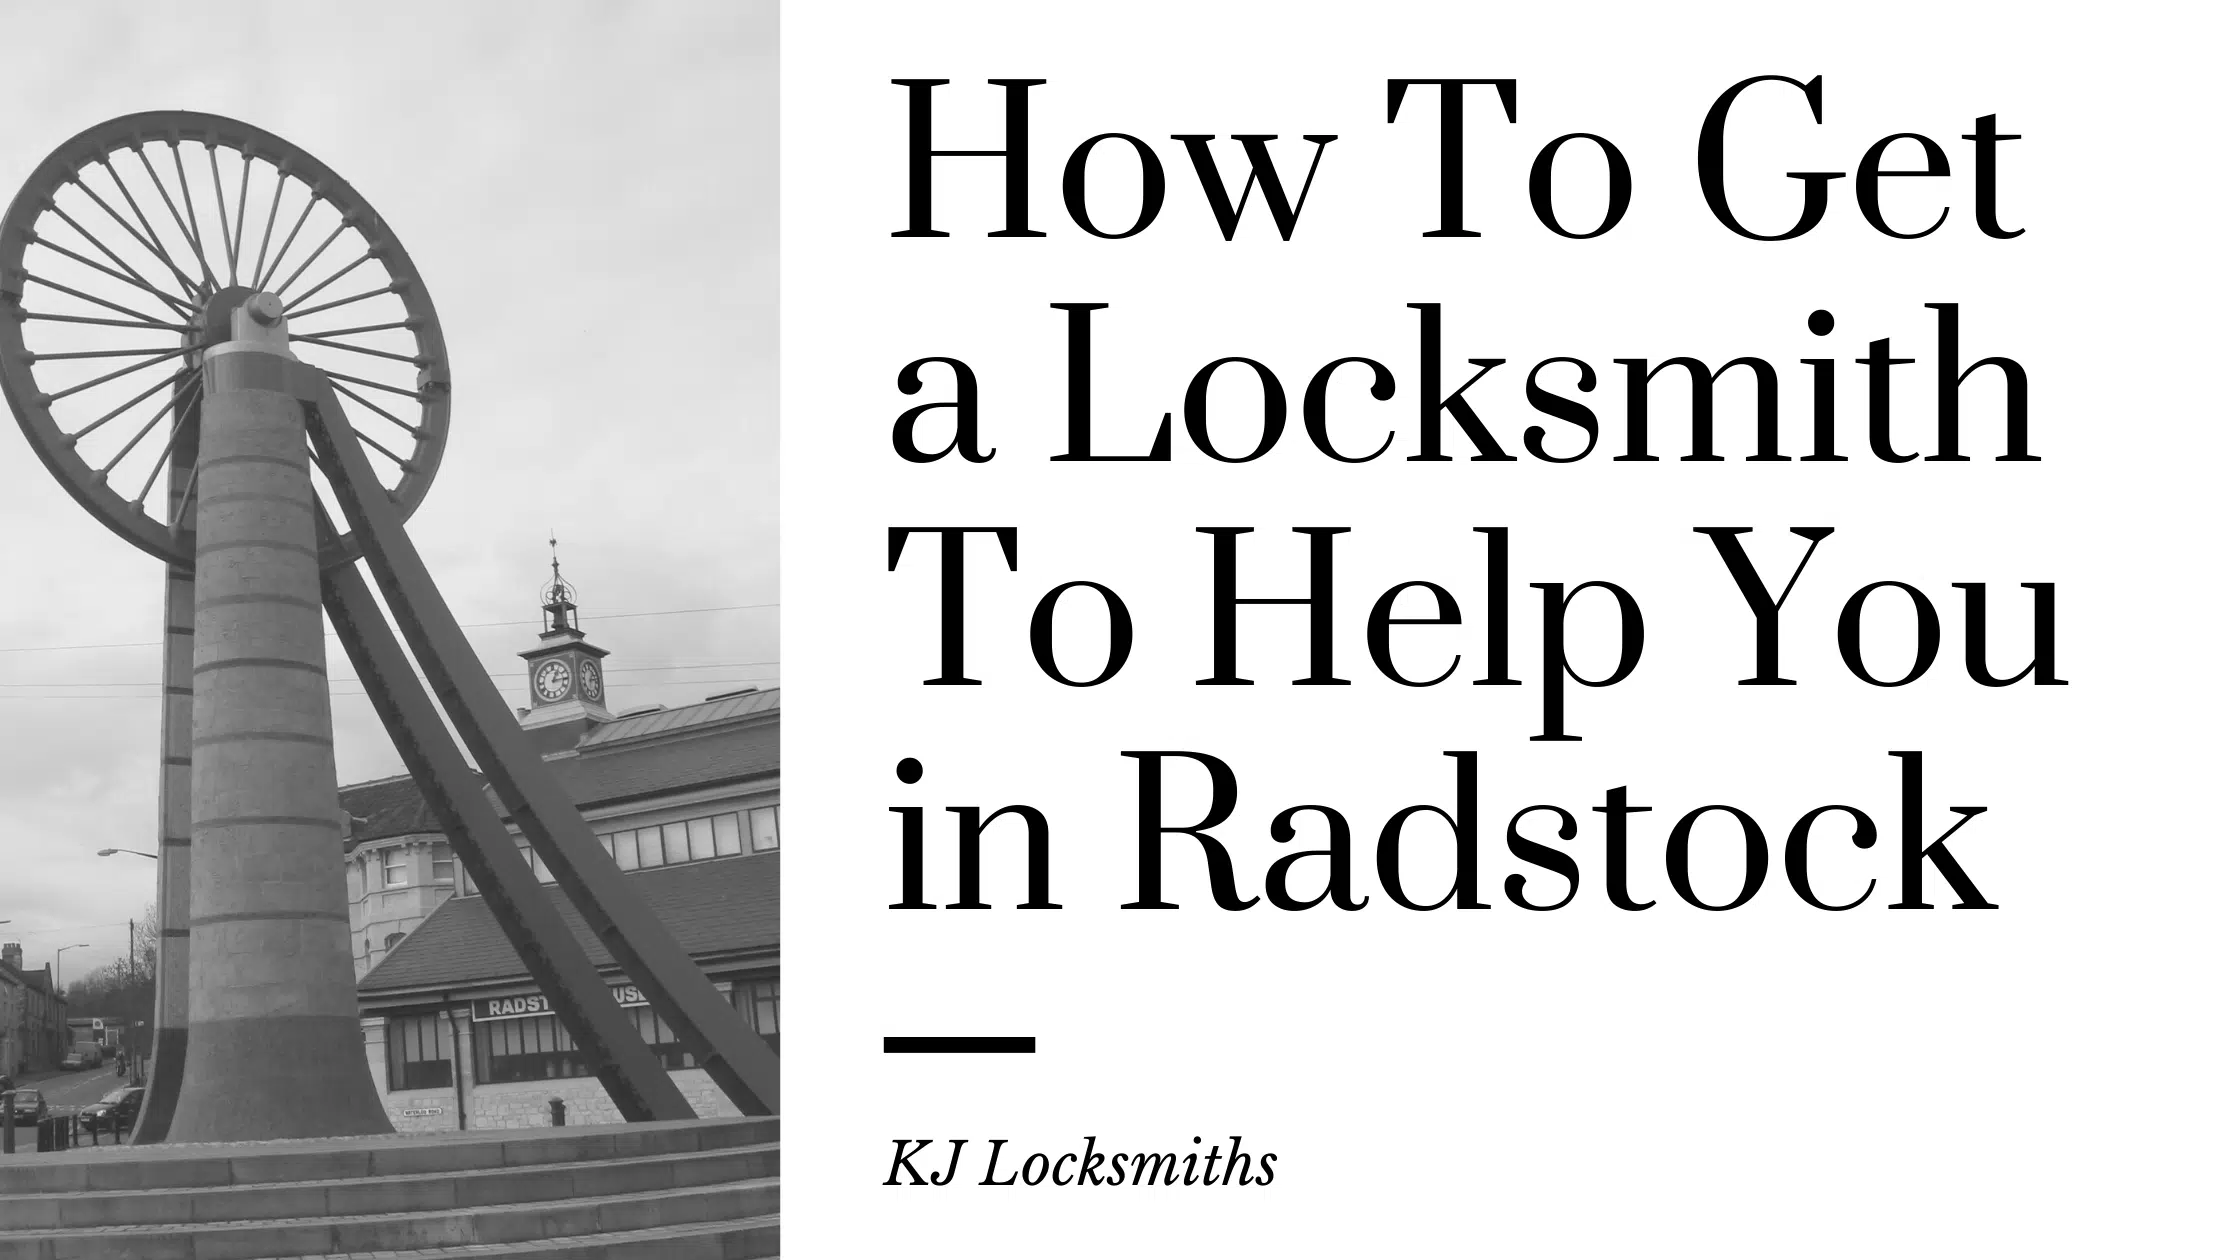 How To Get a Locksmith in Radstock